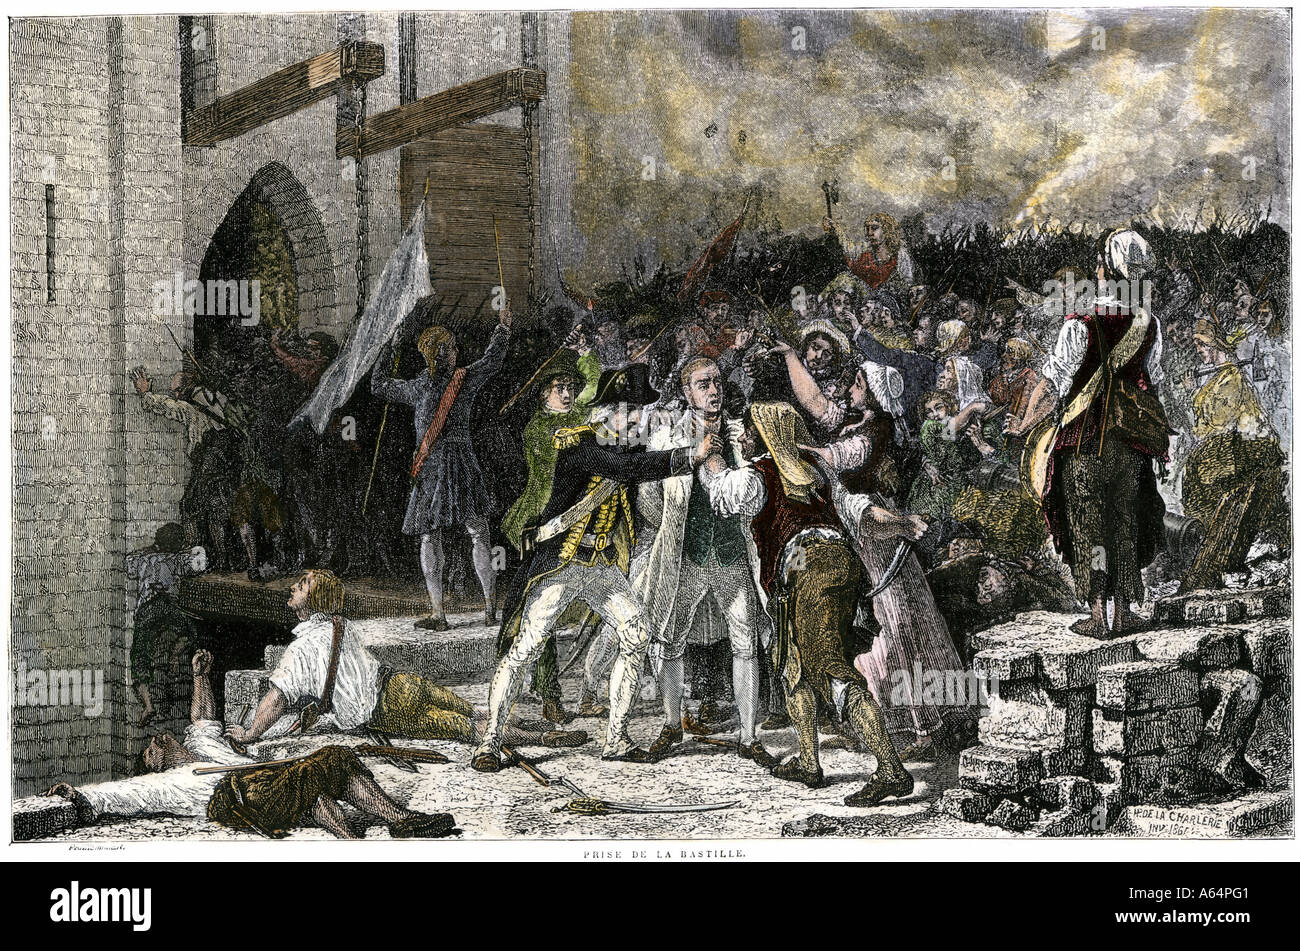 Parisians liberating prisoners after storming the Bastille during the French Revolution. Hand-colored woodcut Stock Photo